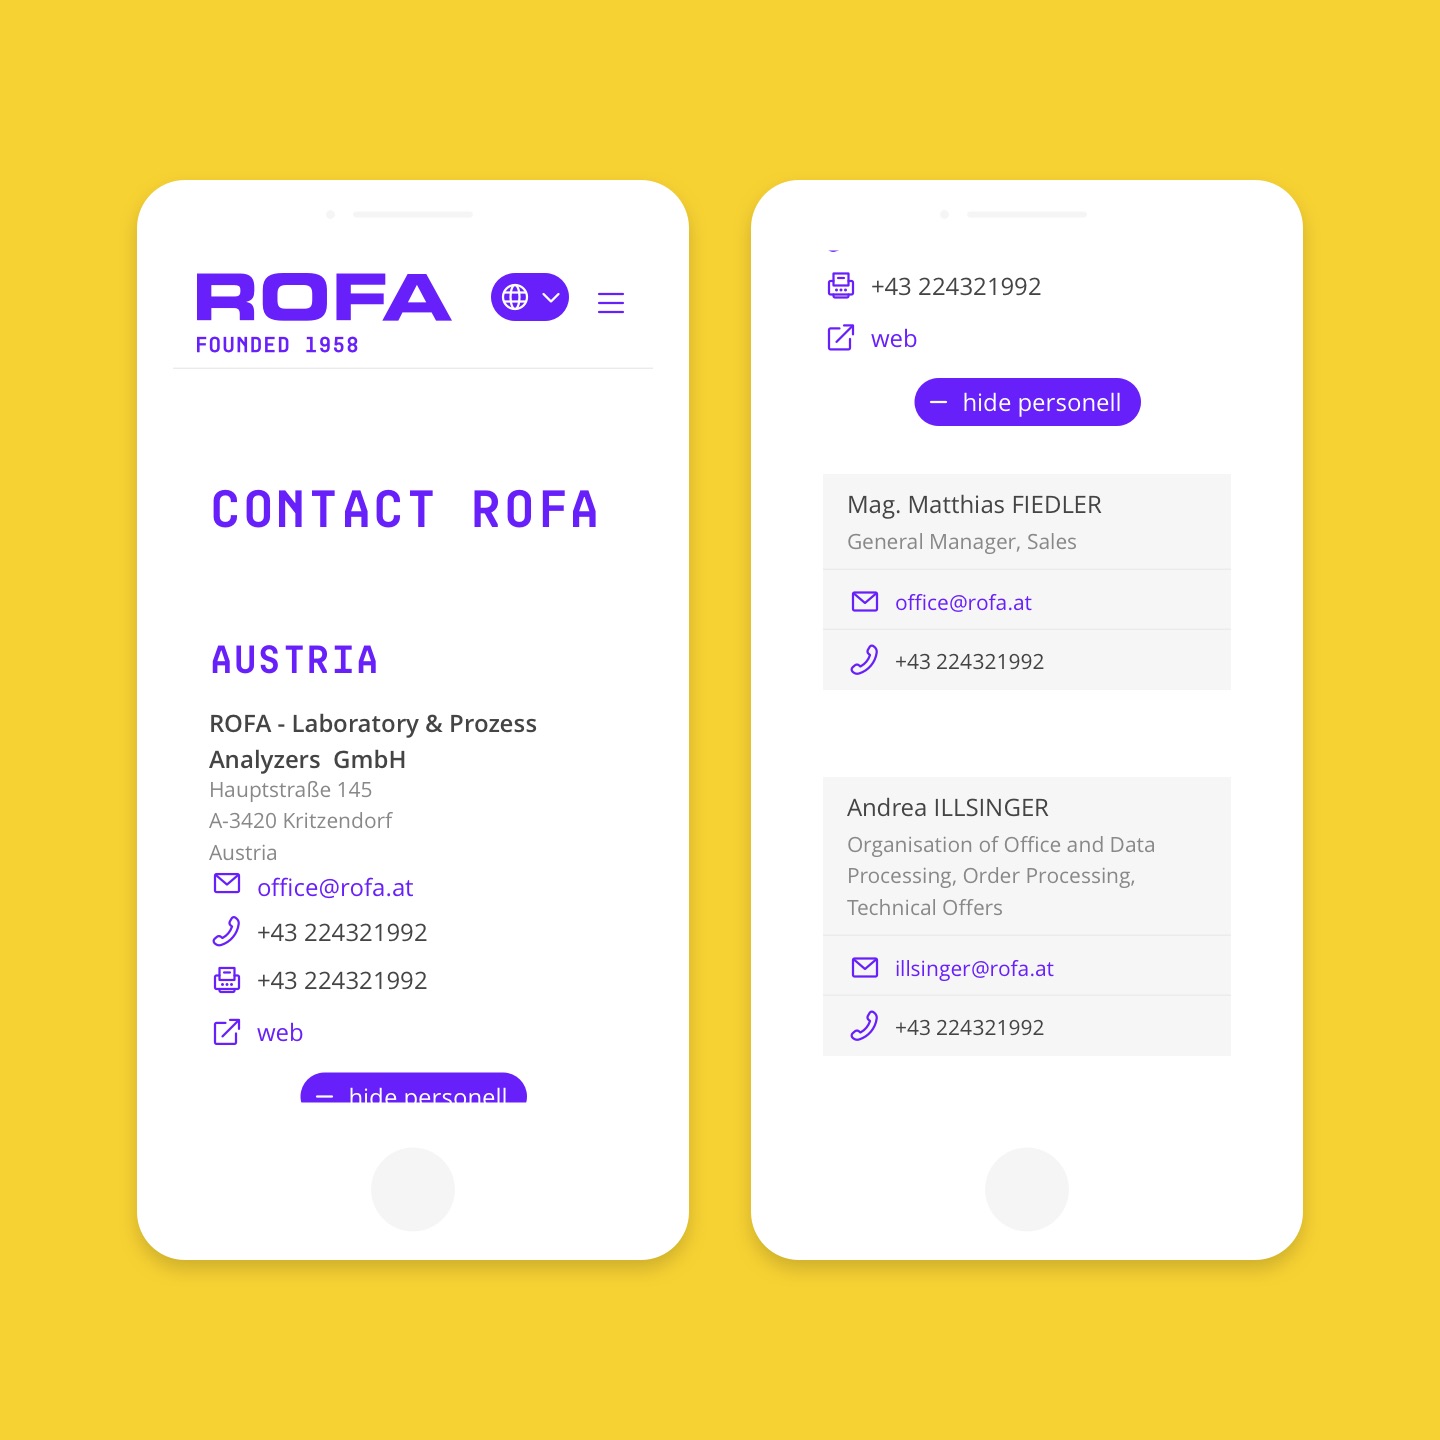 Webdesign of the contact page of rofa.at